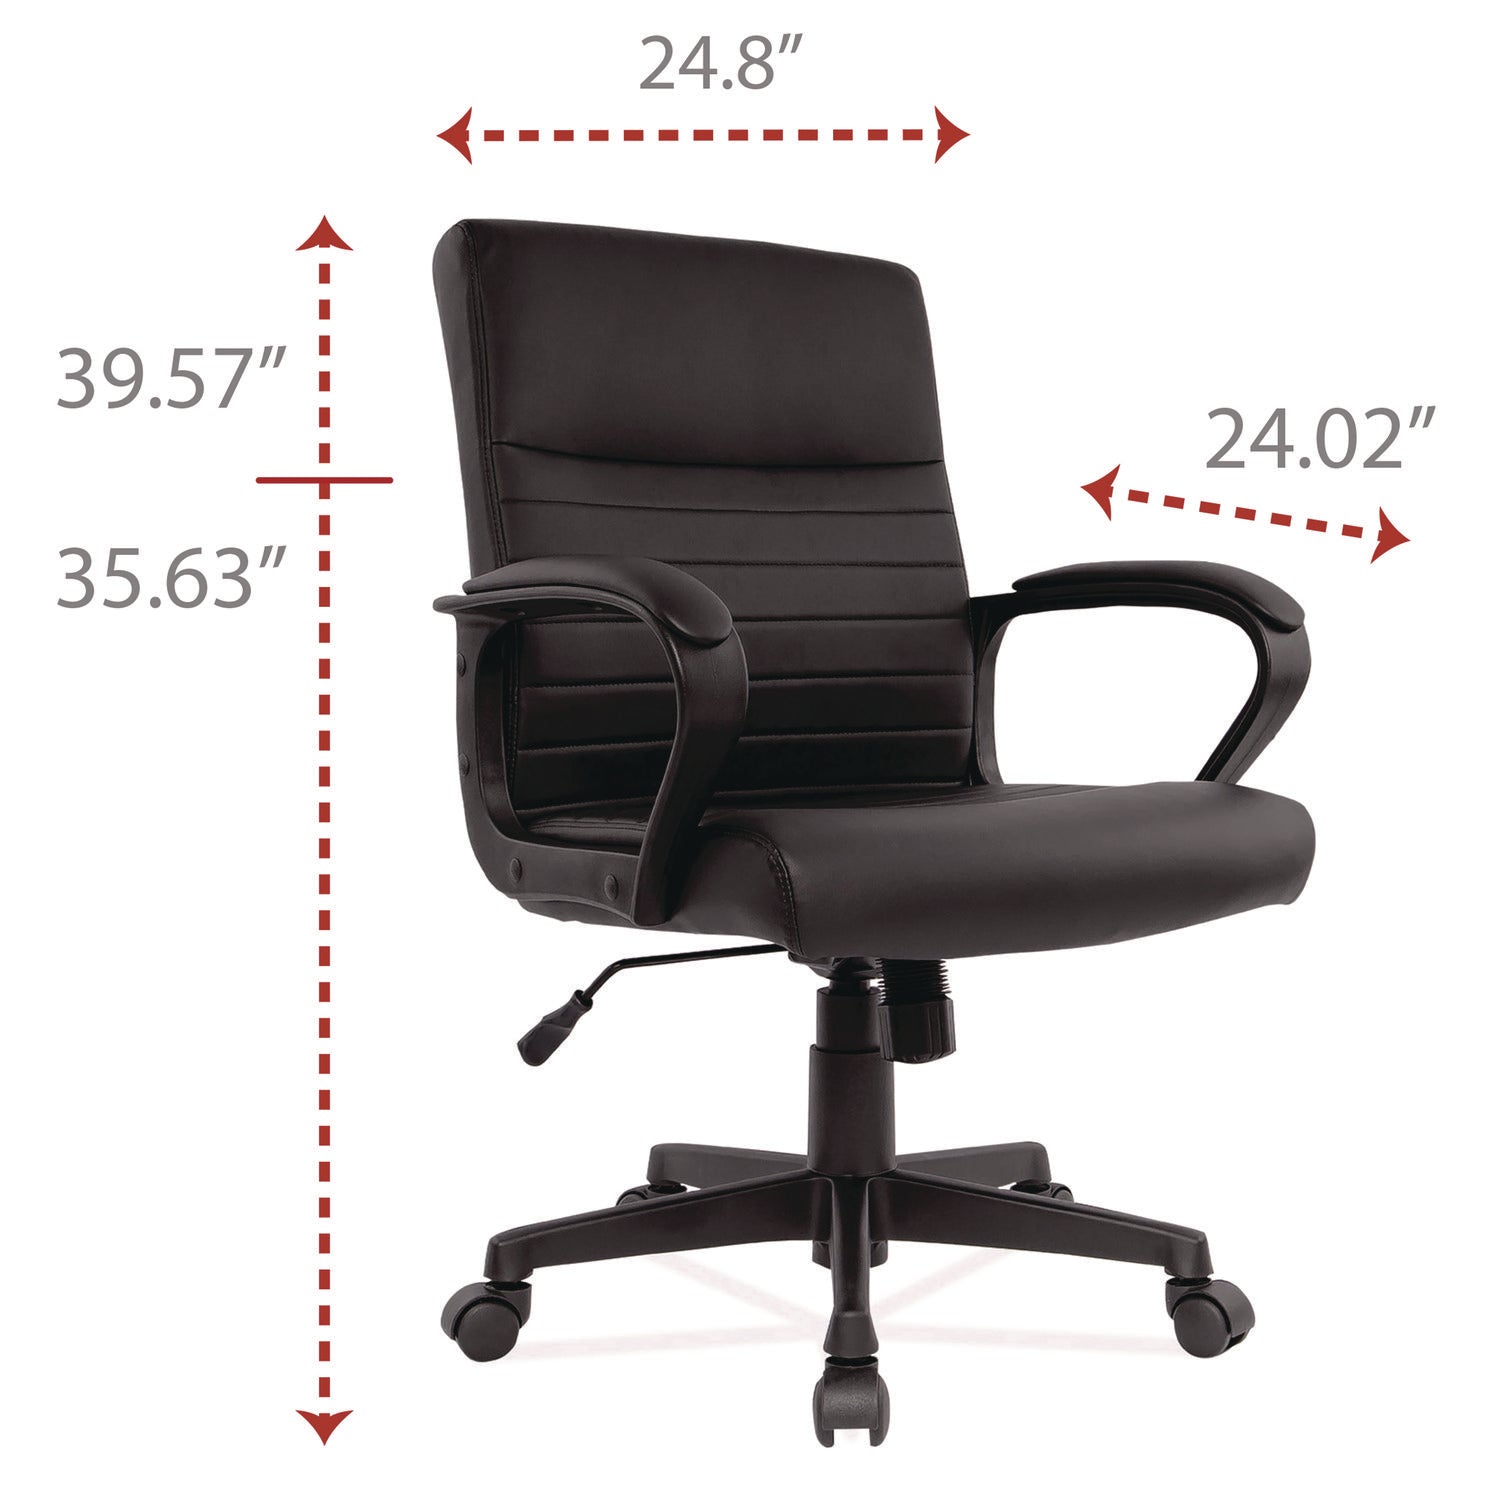 Alera Breich Series Manager Chair, Supports Up to 275 lbs, 16.73" to 20.39" Seat Height, Black Seat/Back, Black Base - 7